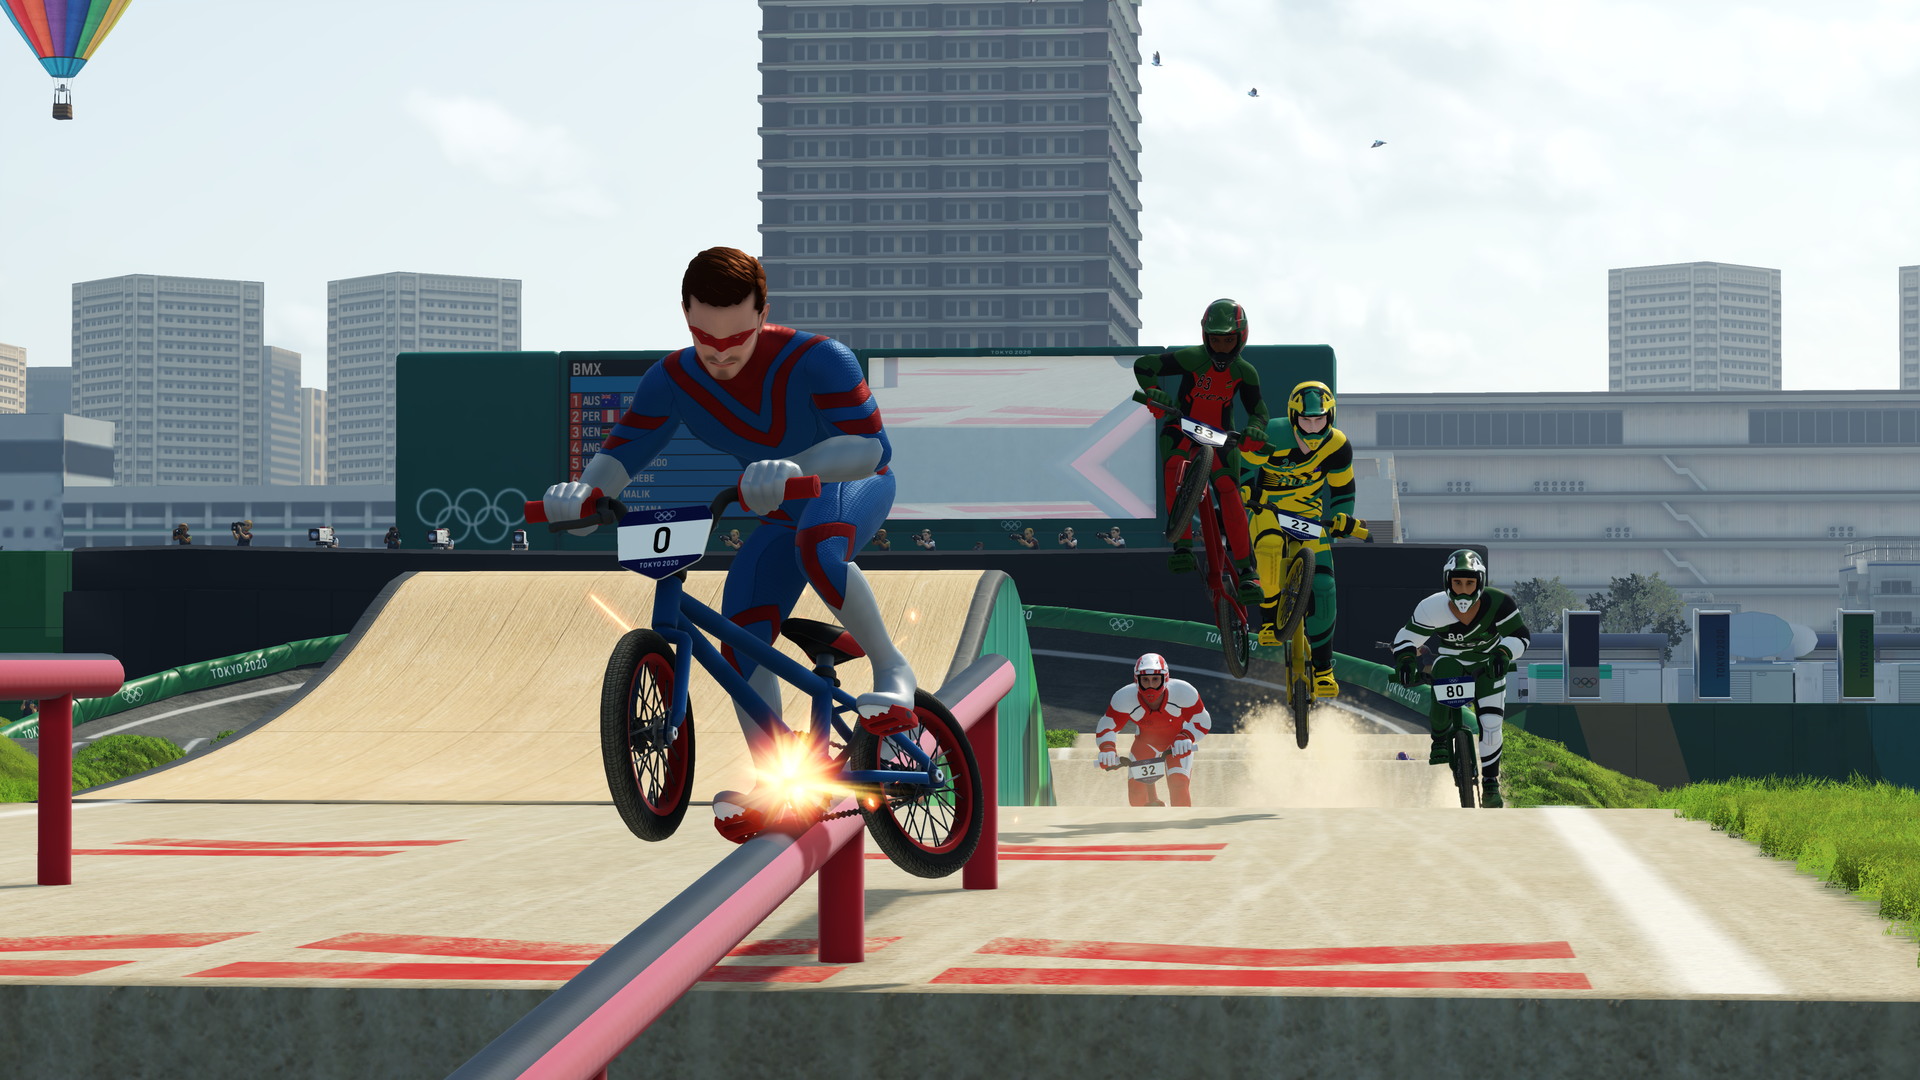 Olympic Games Tokyo 2020 - The Official Video Game - screenshot 13